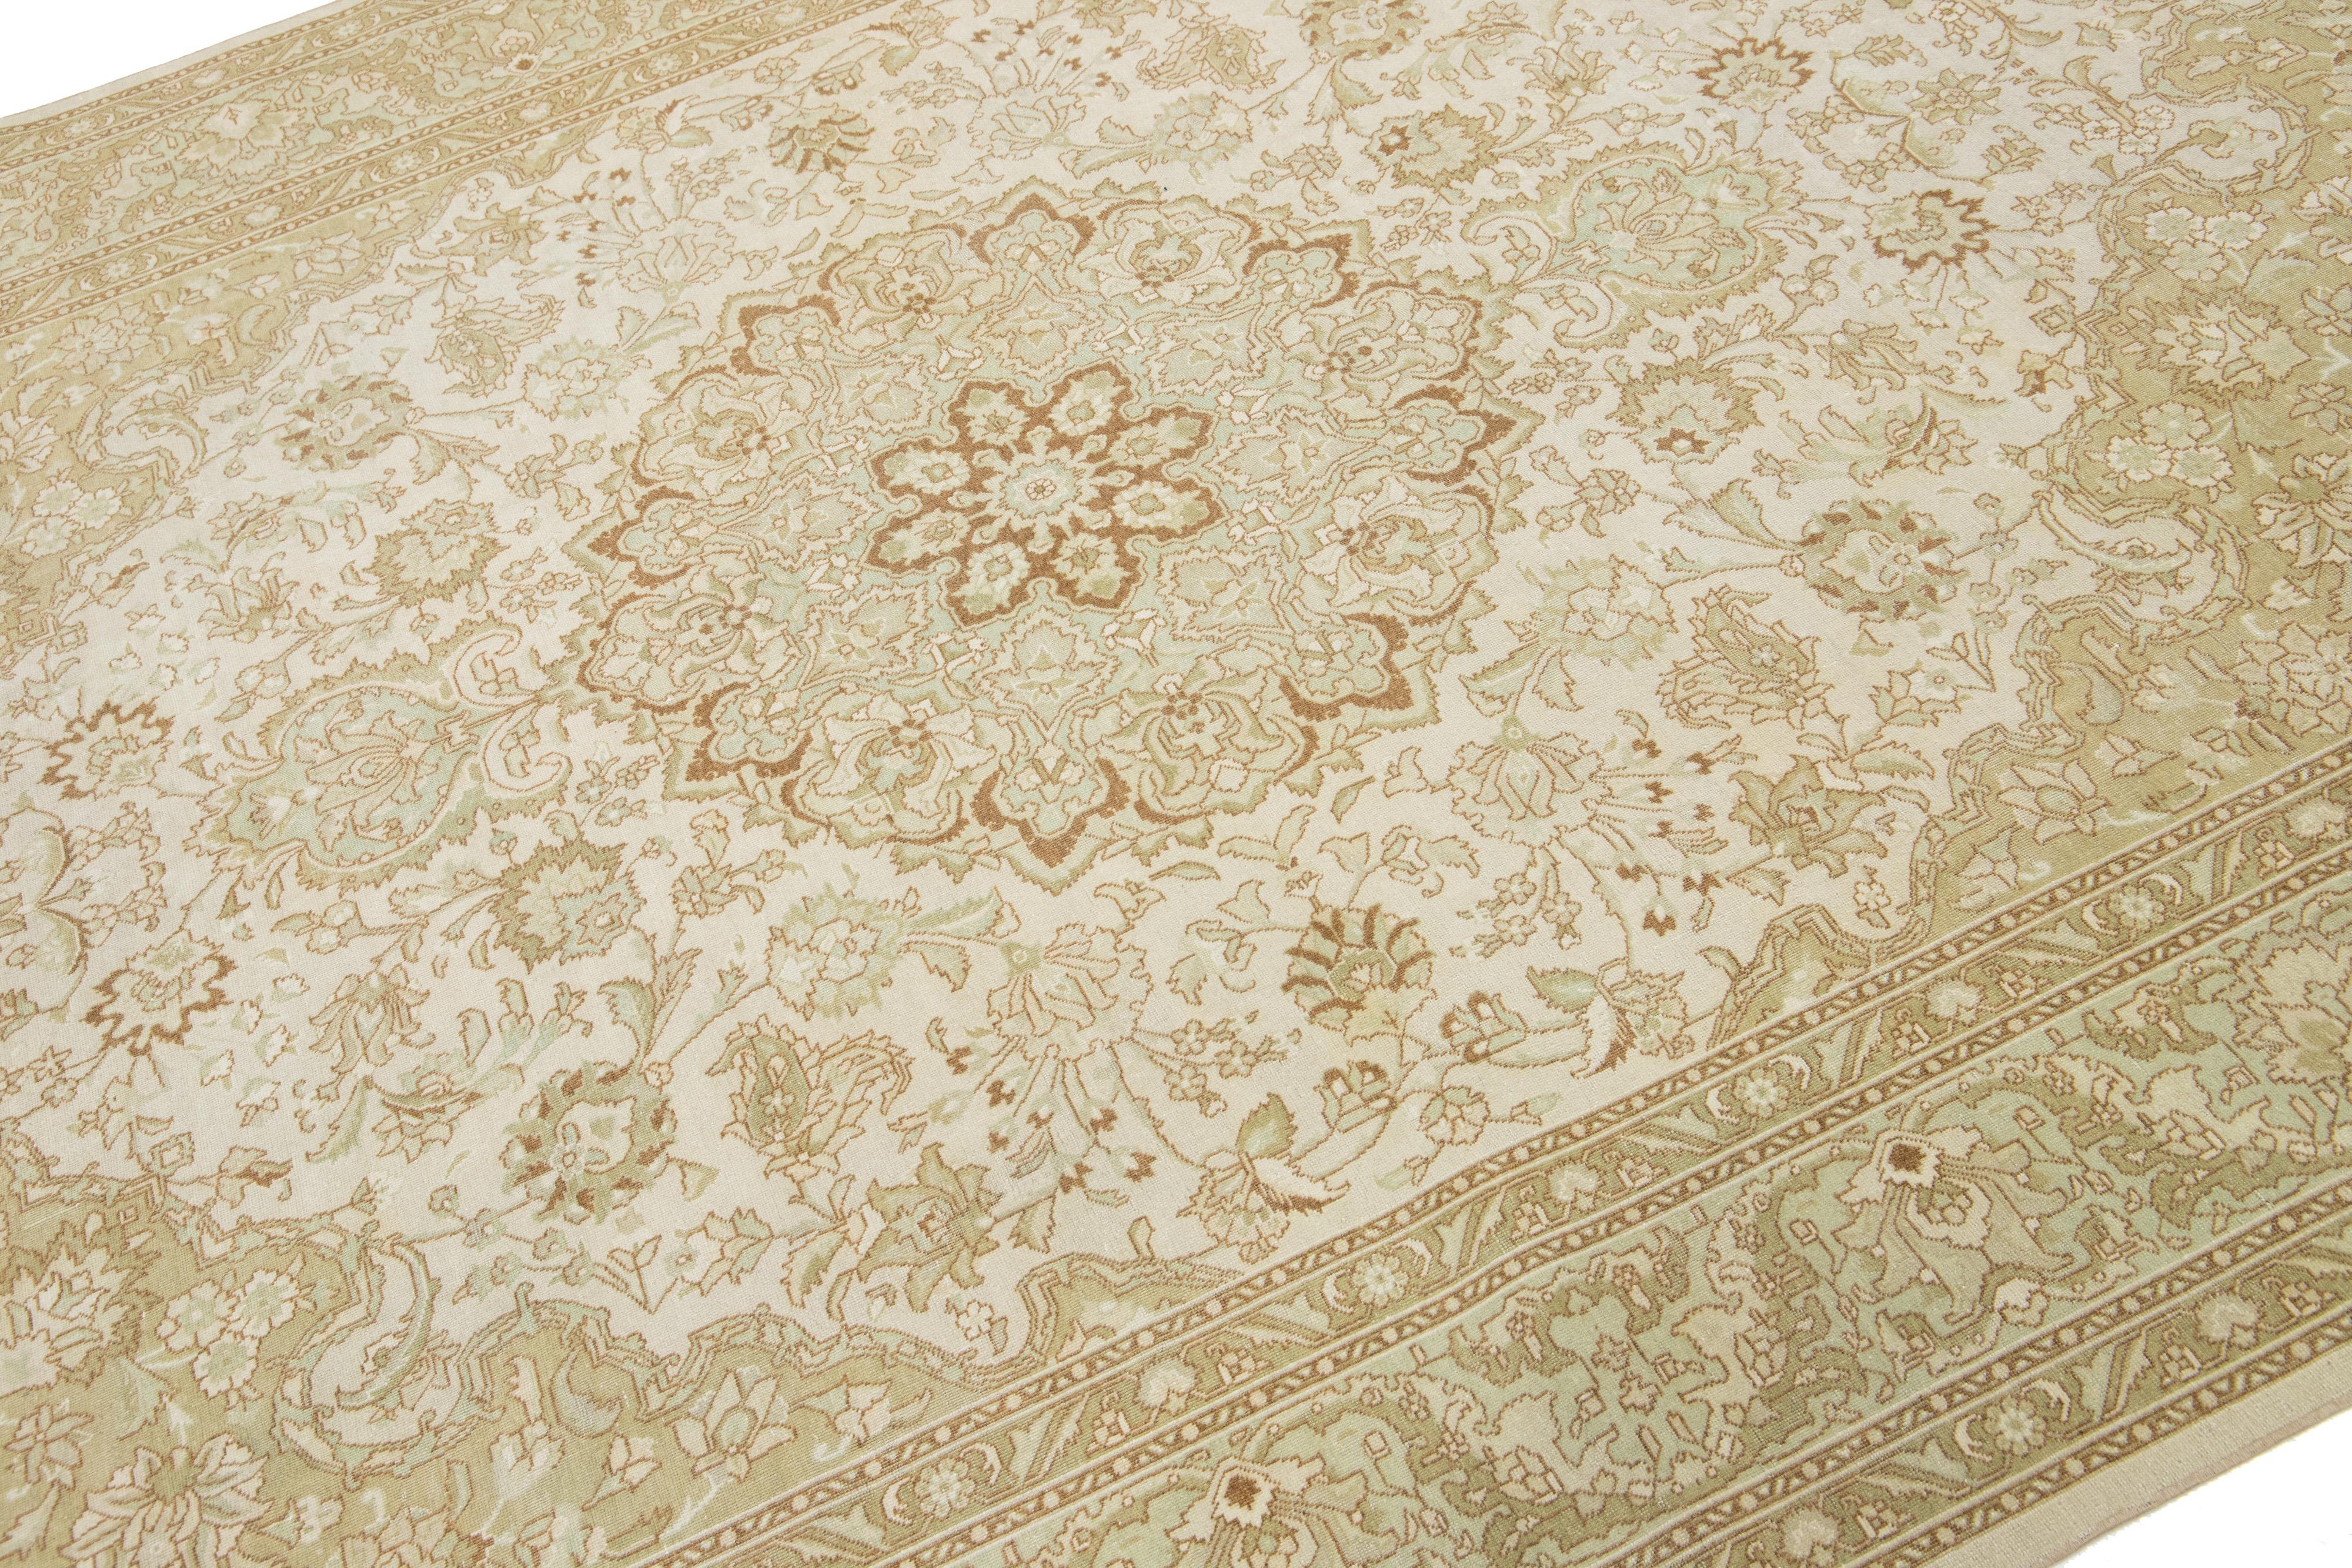 Hand-Knotted 1920s Antique Persian Tabriz Wool Rug Allover Floral In Beige Color For Sale